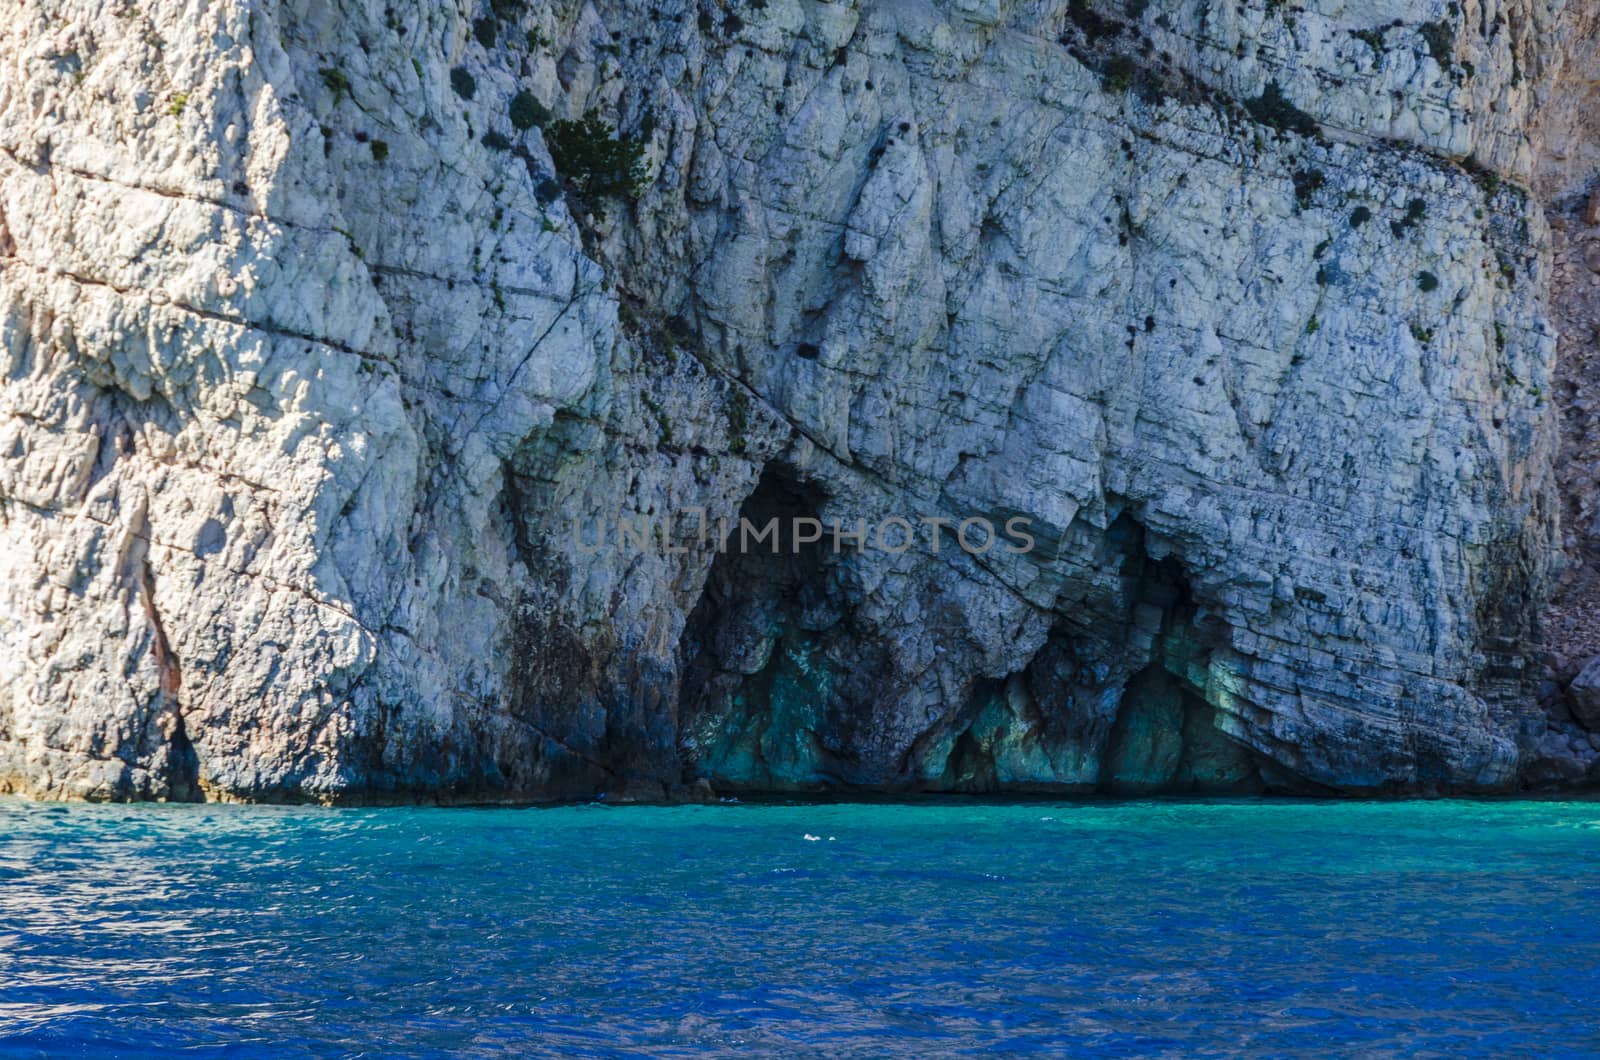 Reflections of the sea on the walls of caves on the shores of the island of Zakynthos in the Ionian Sea